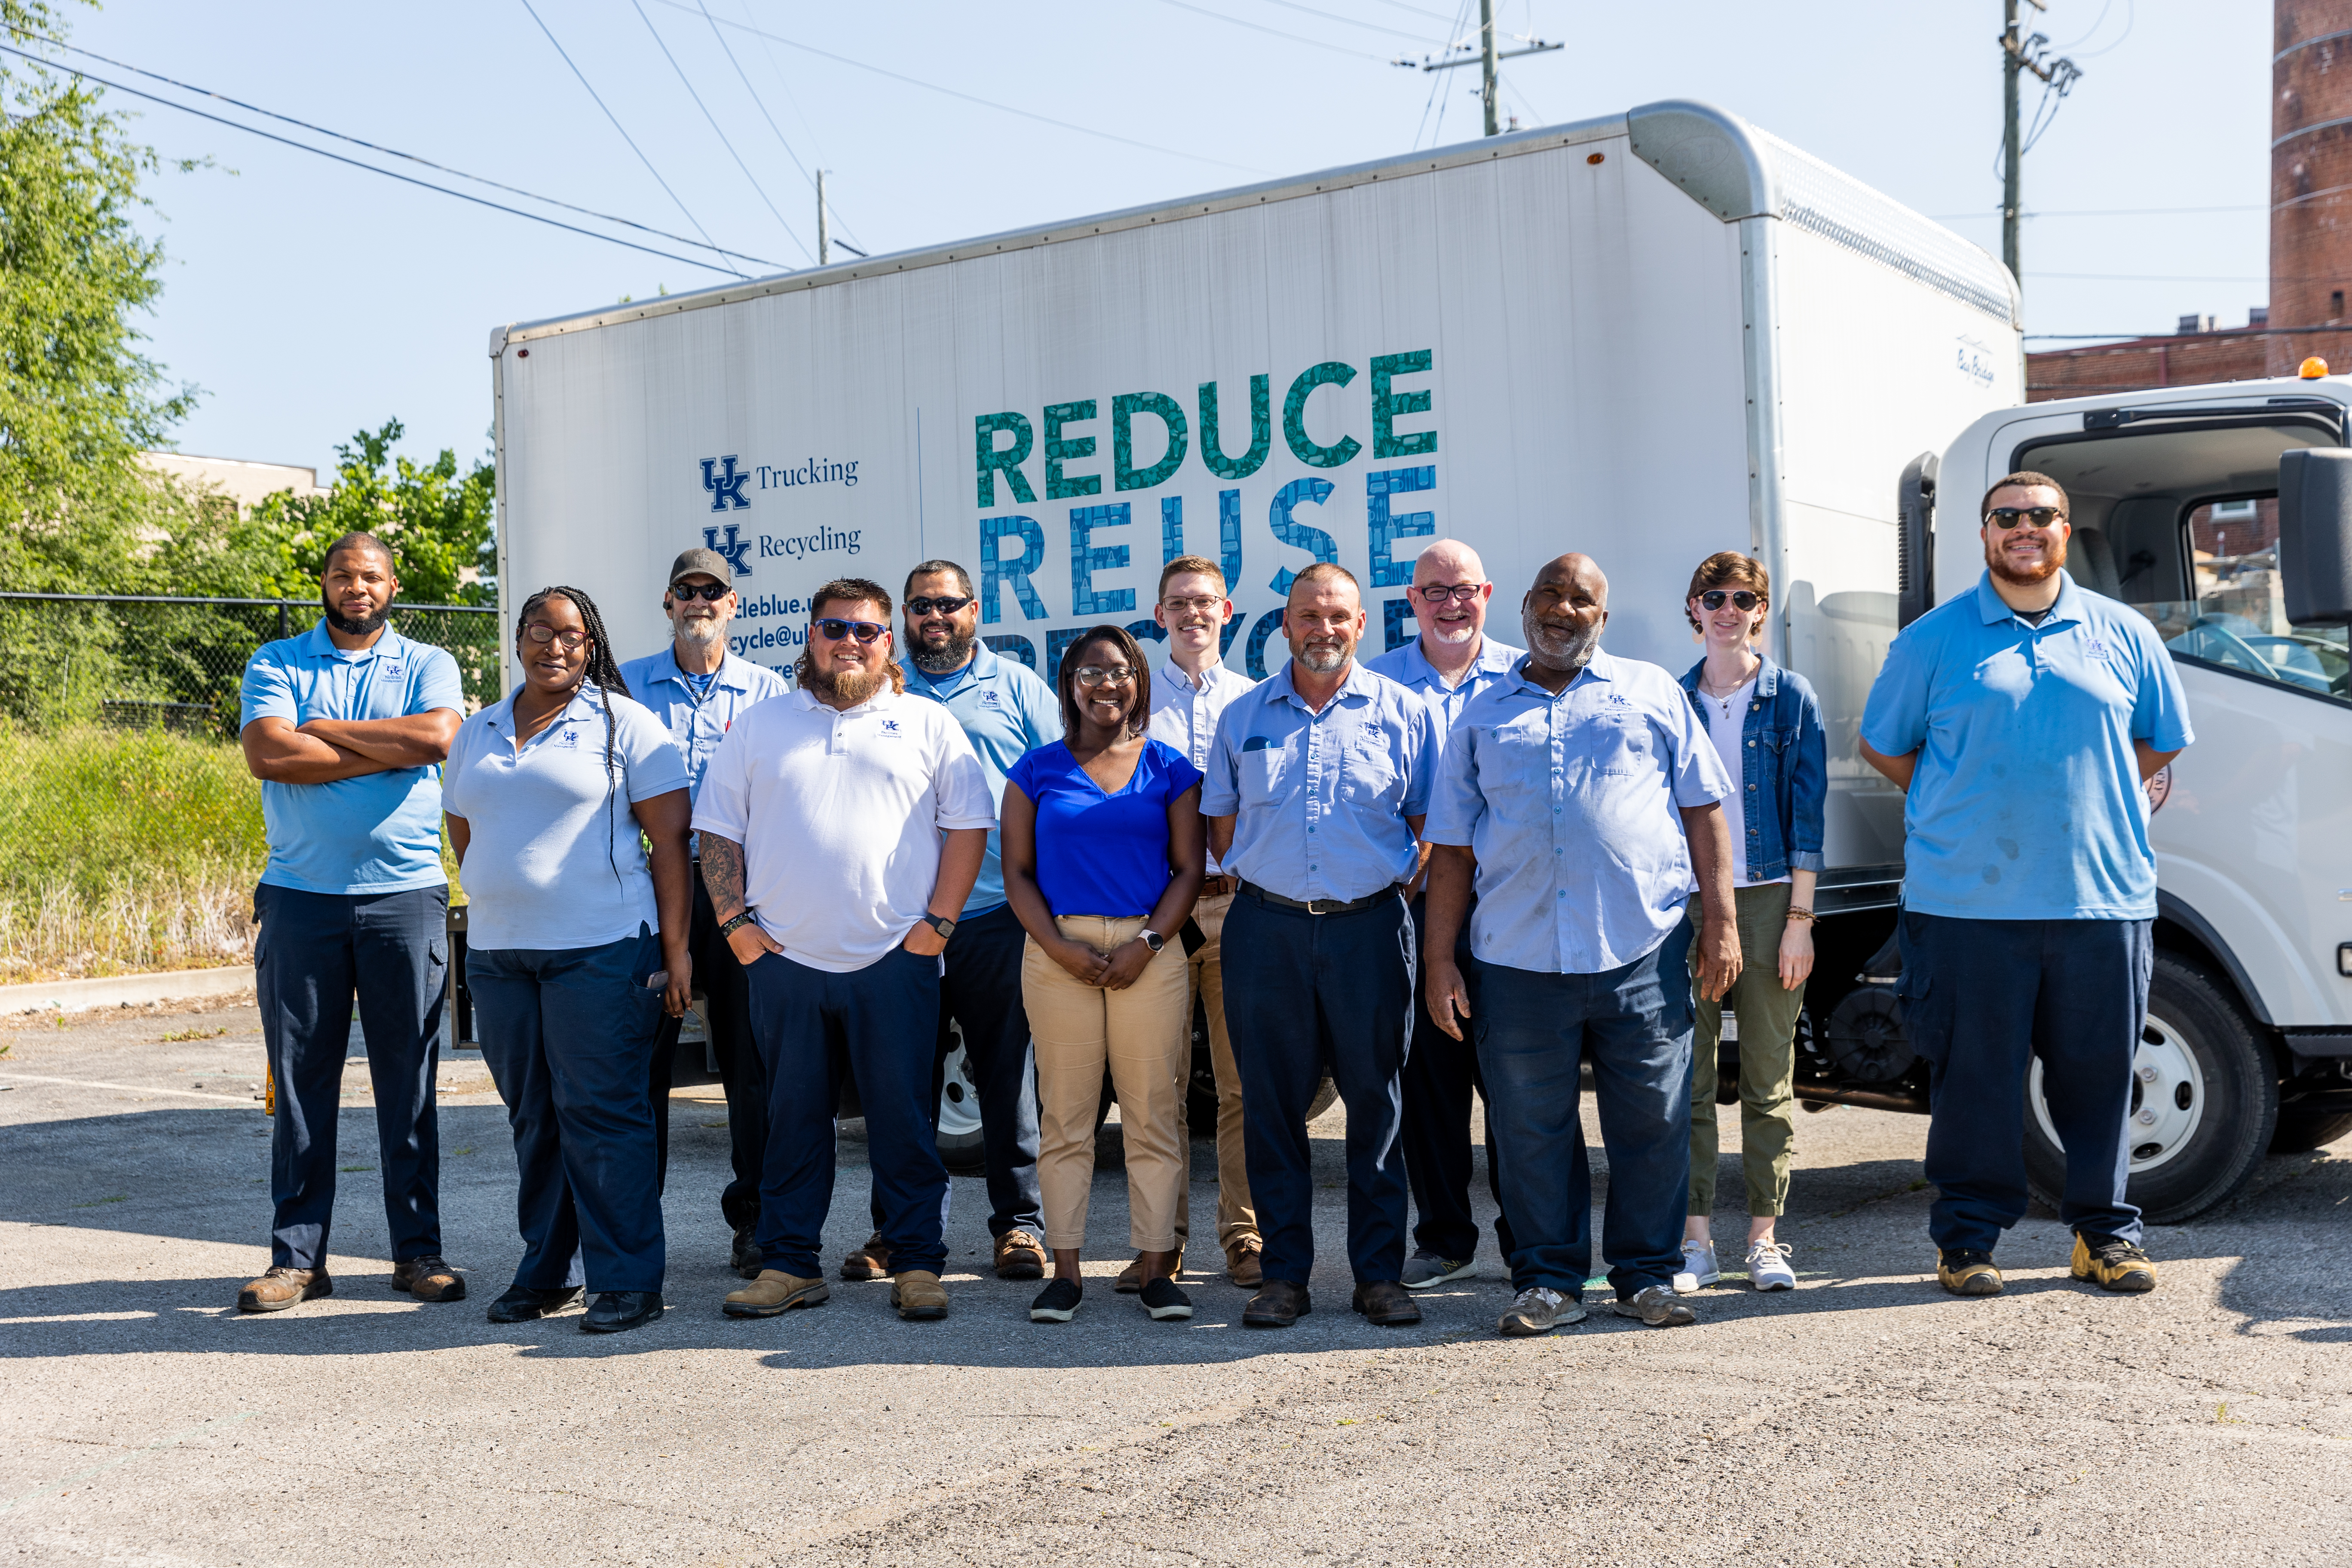 Group staff photo of UK Waste Management, Trucking, and Recycling. In the back row is Louis, Ken, Anthony, Ryan, Michael, Katie, and Jordan. In the front row is K'rissa, Shaun, Breanna, Tim, and Raglan